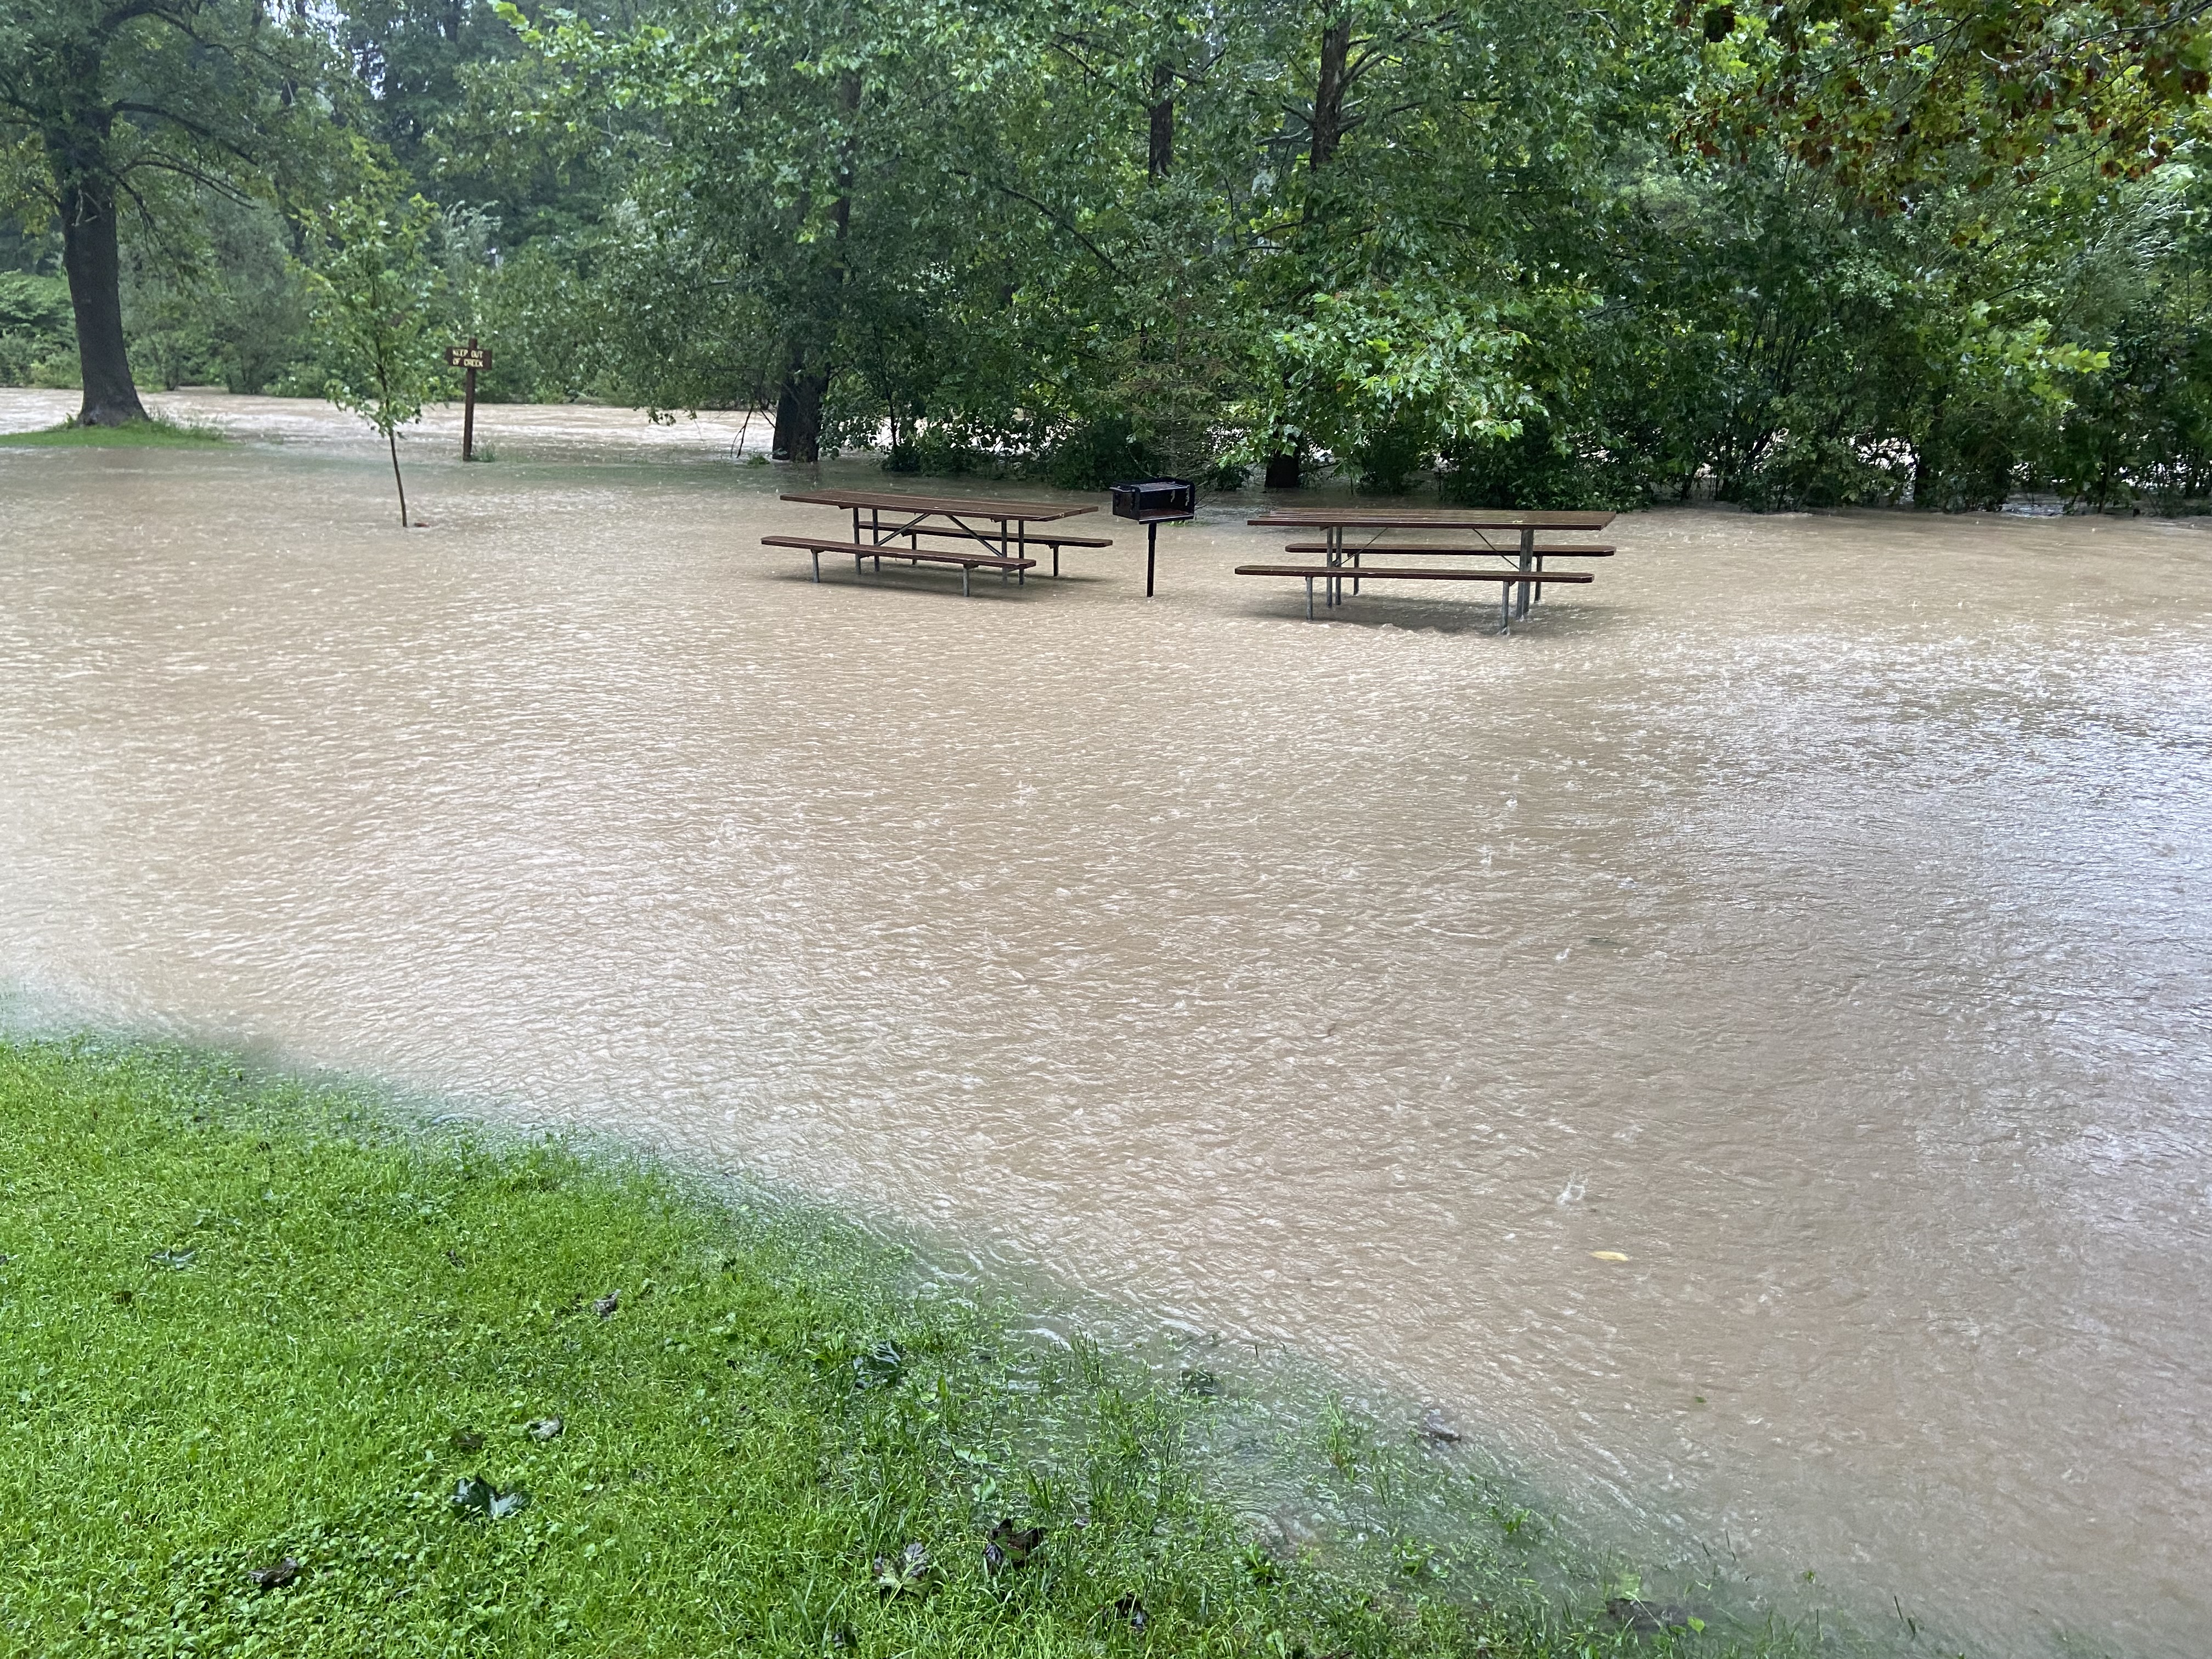 Flooding in the lower part of Marcellus Park in the village of Marcellus on Thursday, Aug. 19, 2021.